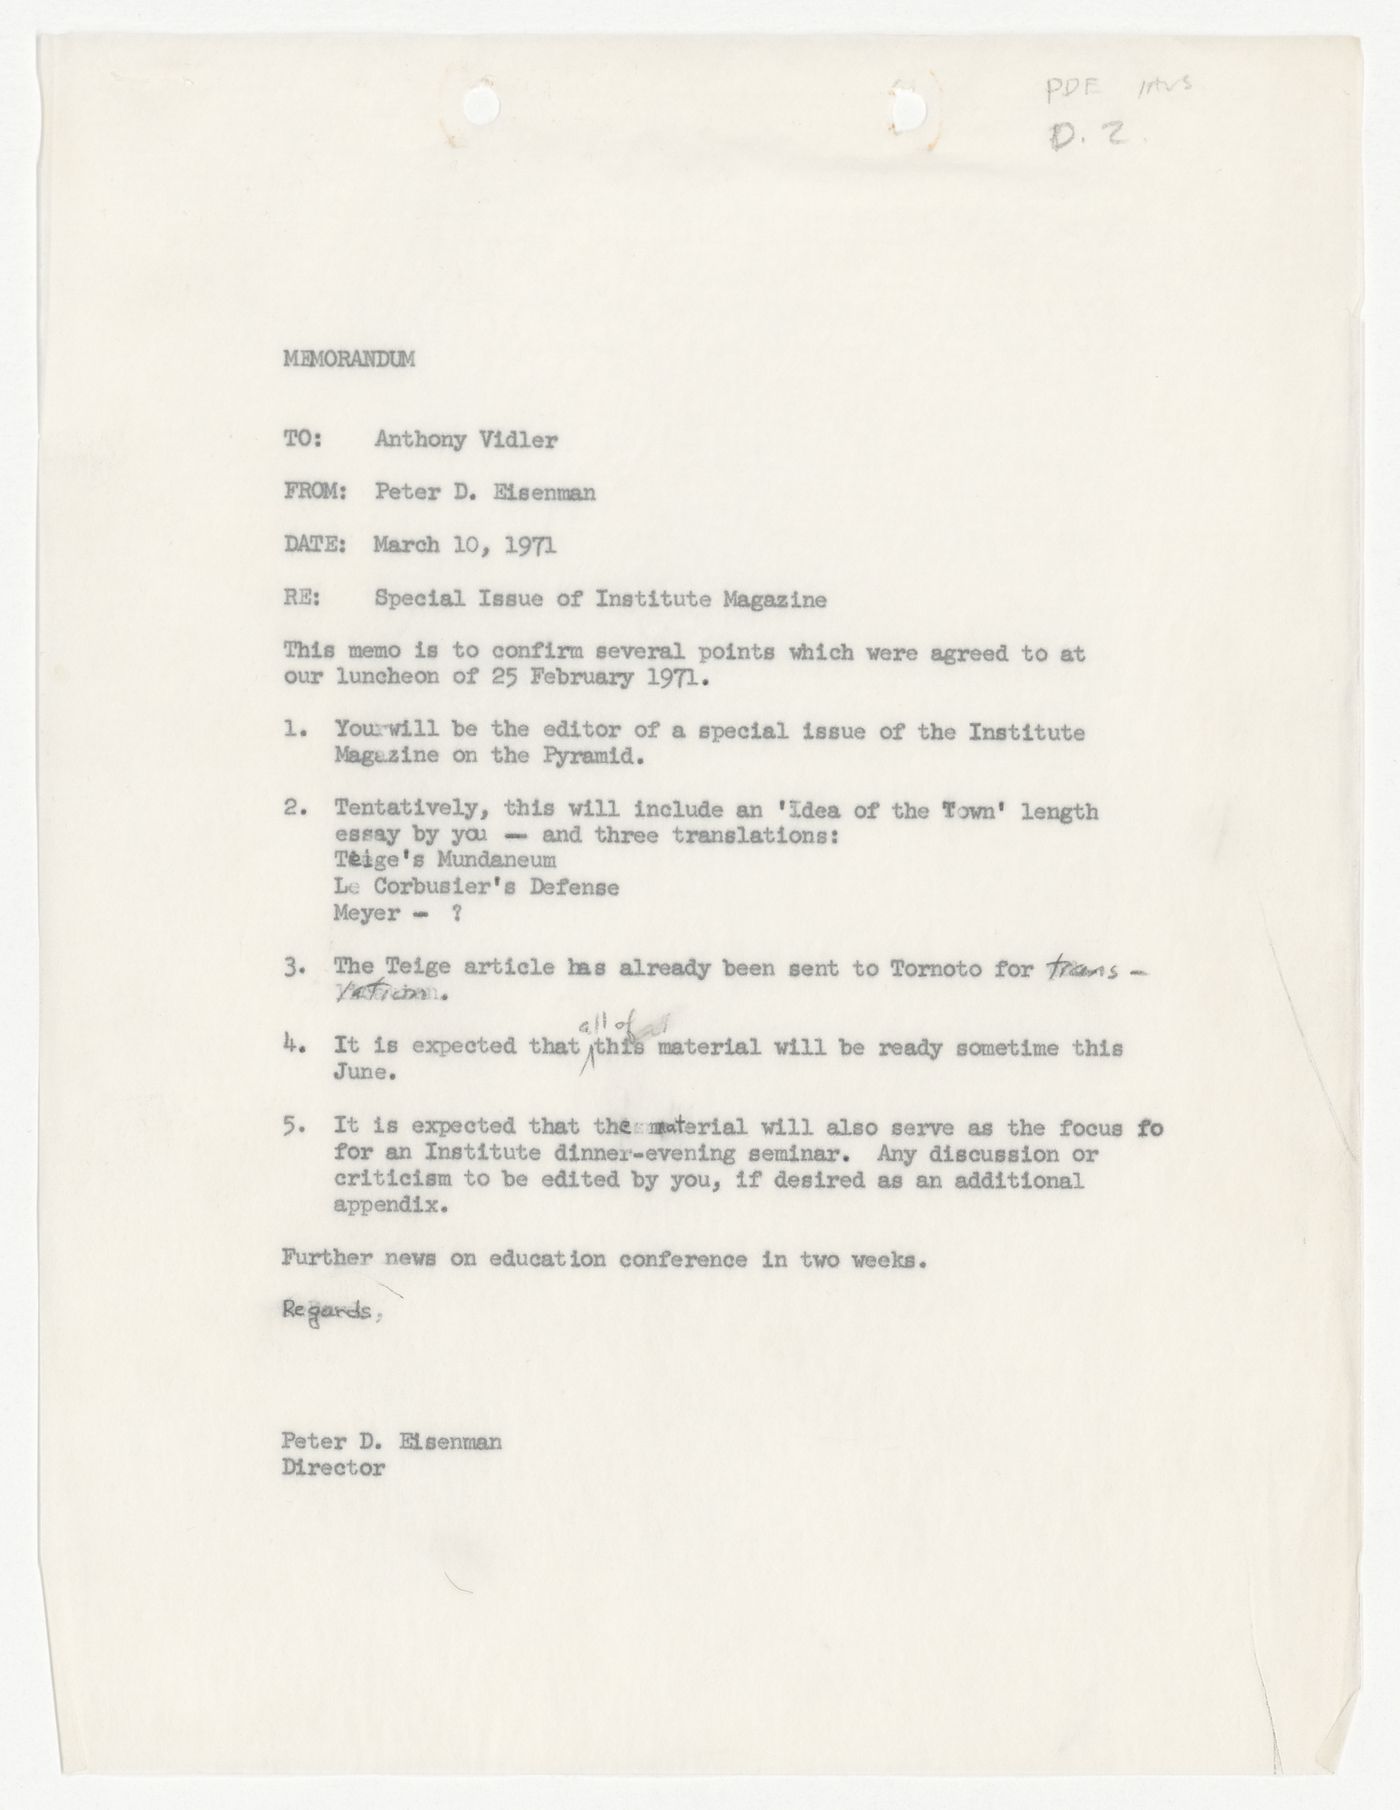 Memorandum from Peter D. Eisenman to Anthony Vidler about special issue of Institute magazine